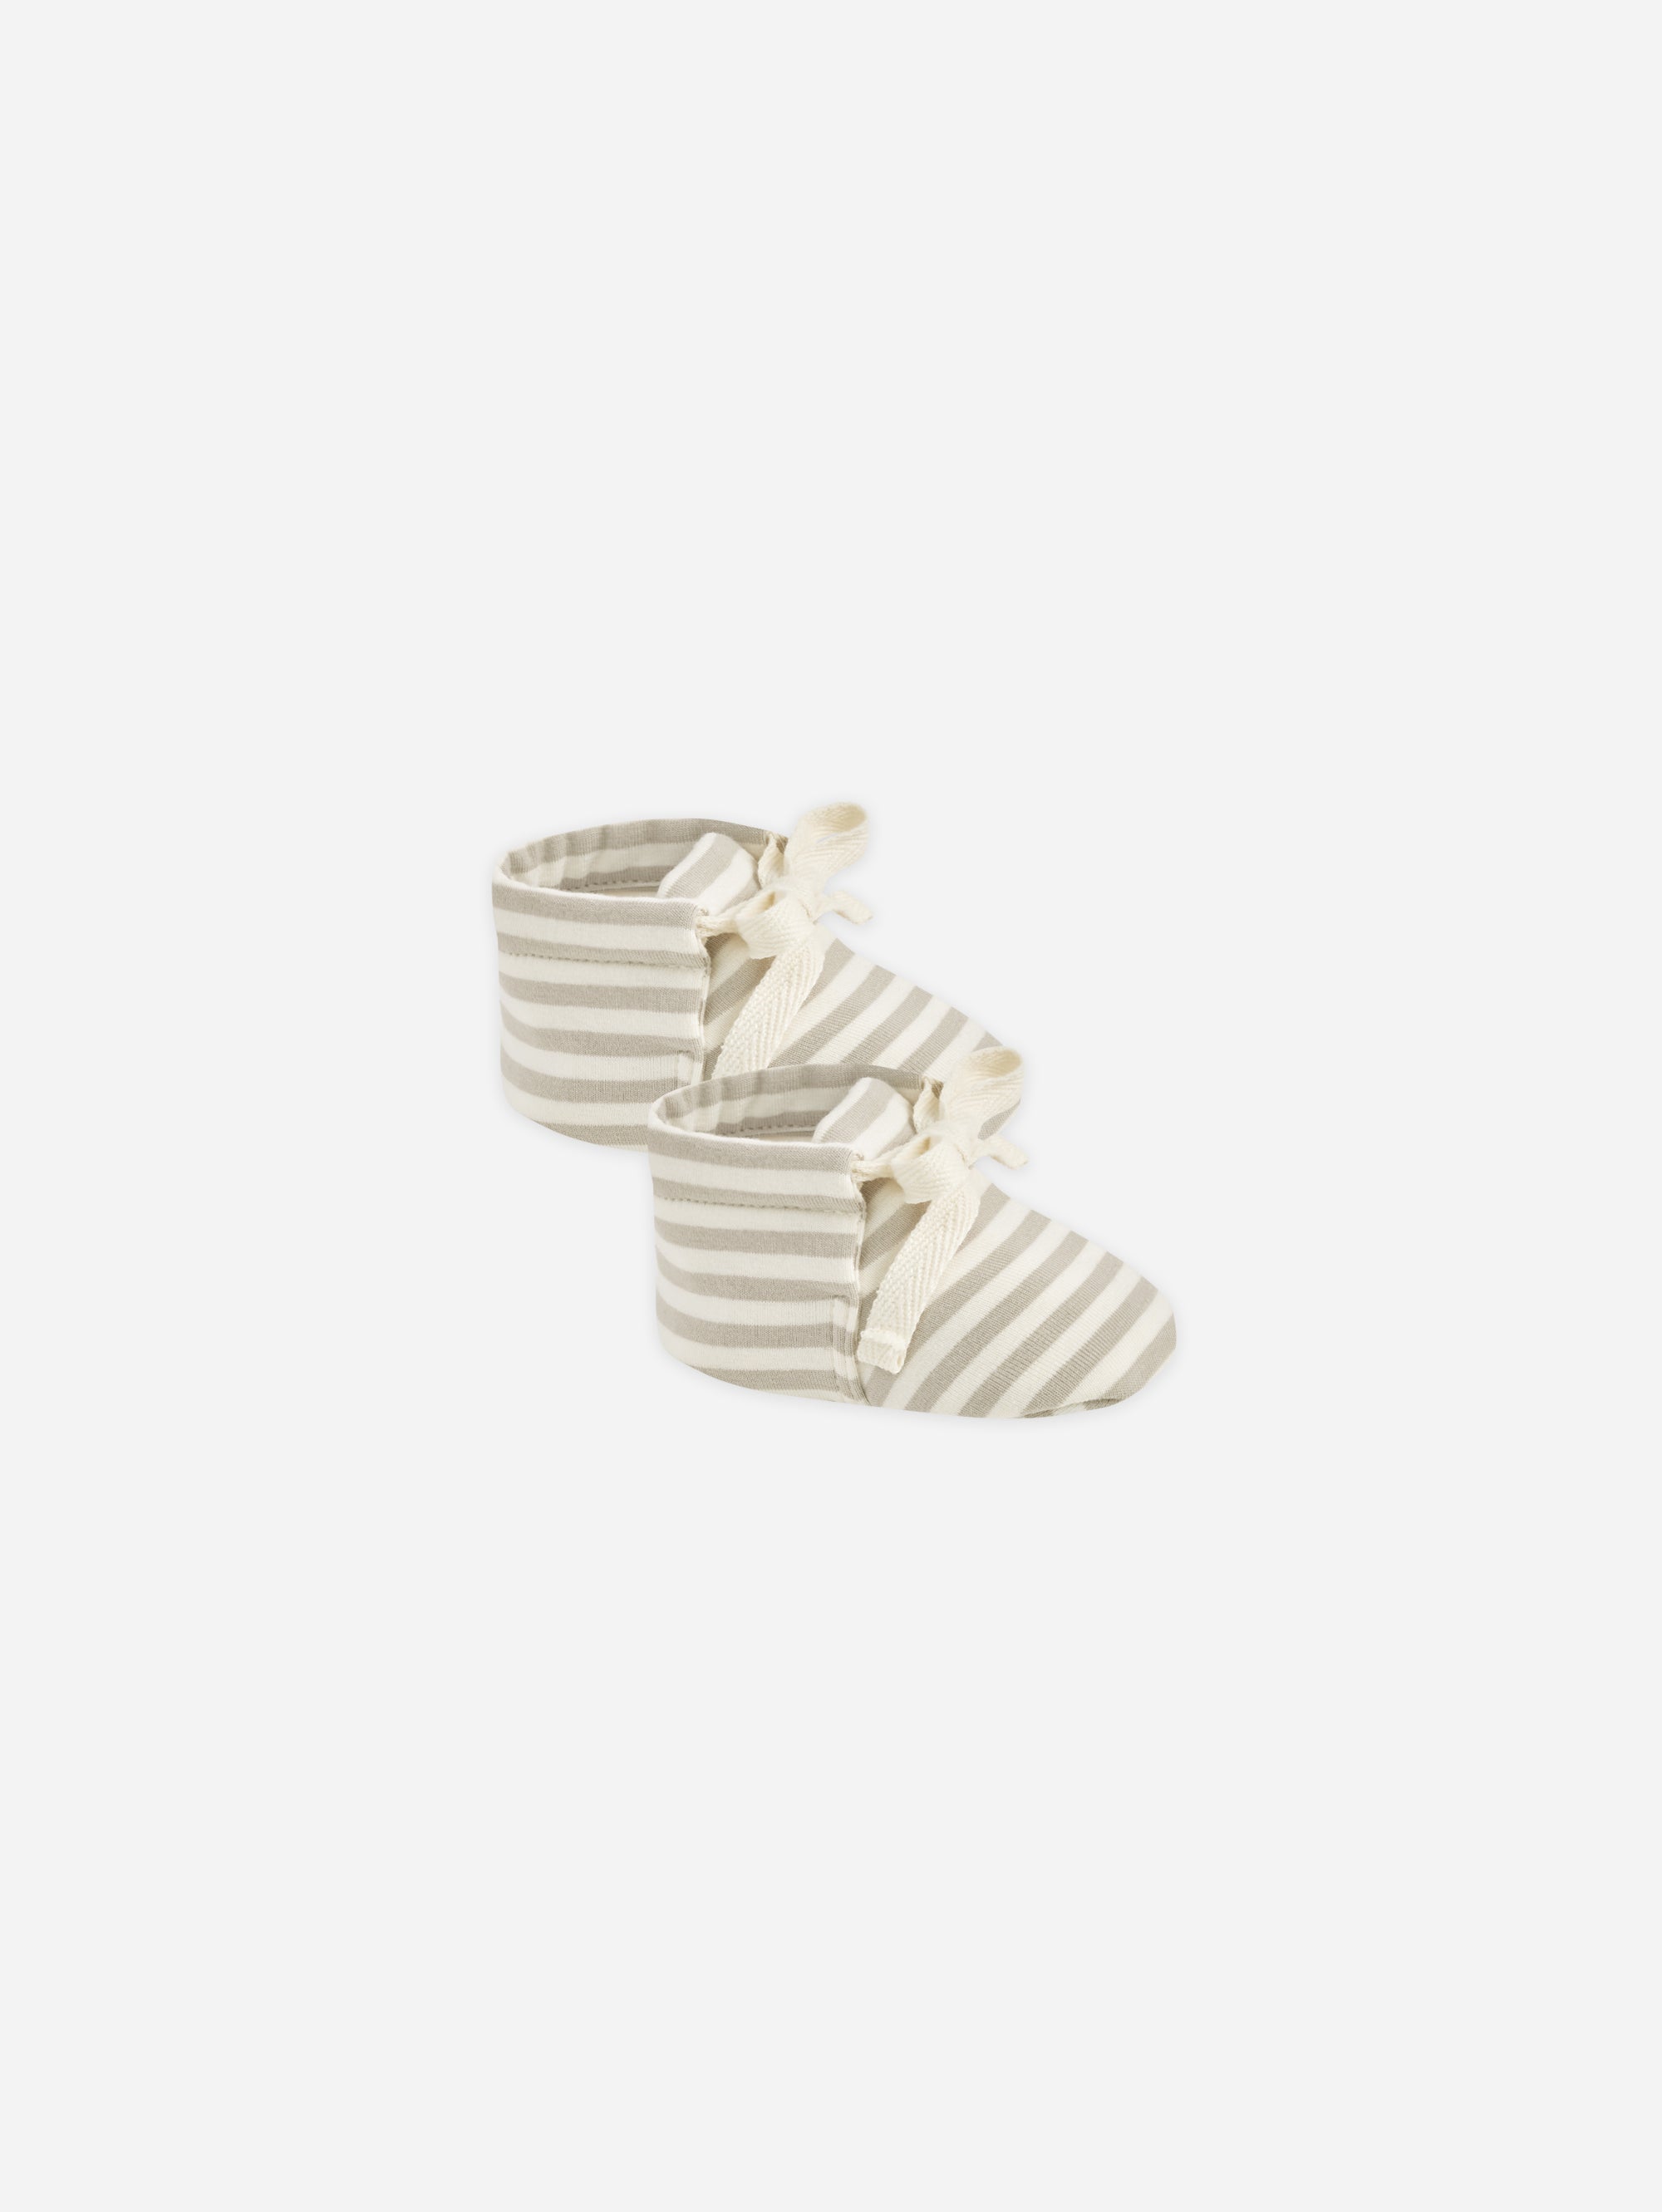 Baby Booties || Ash Stripe - Rylee + Cru | Kids Clothes | Trendy Baby Clothes | Modern Infant Outfits |